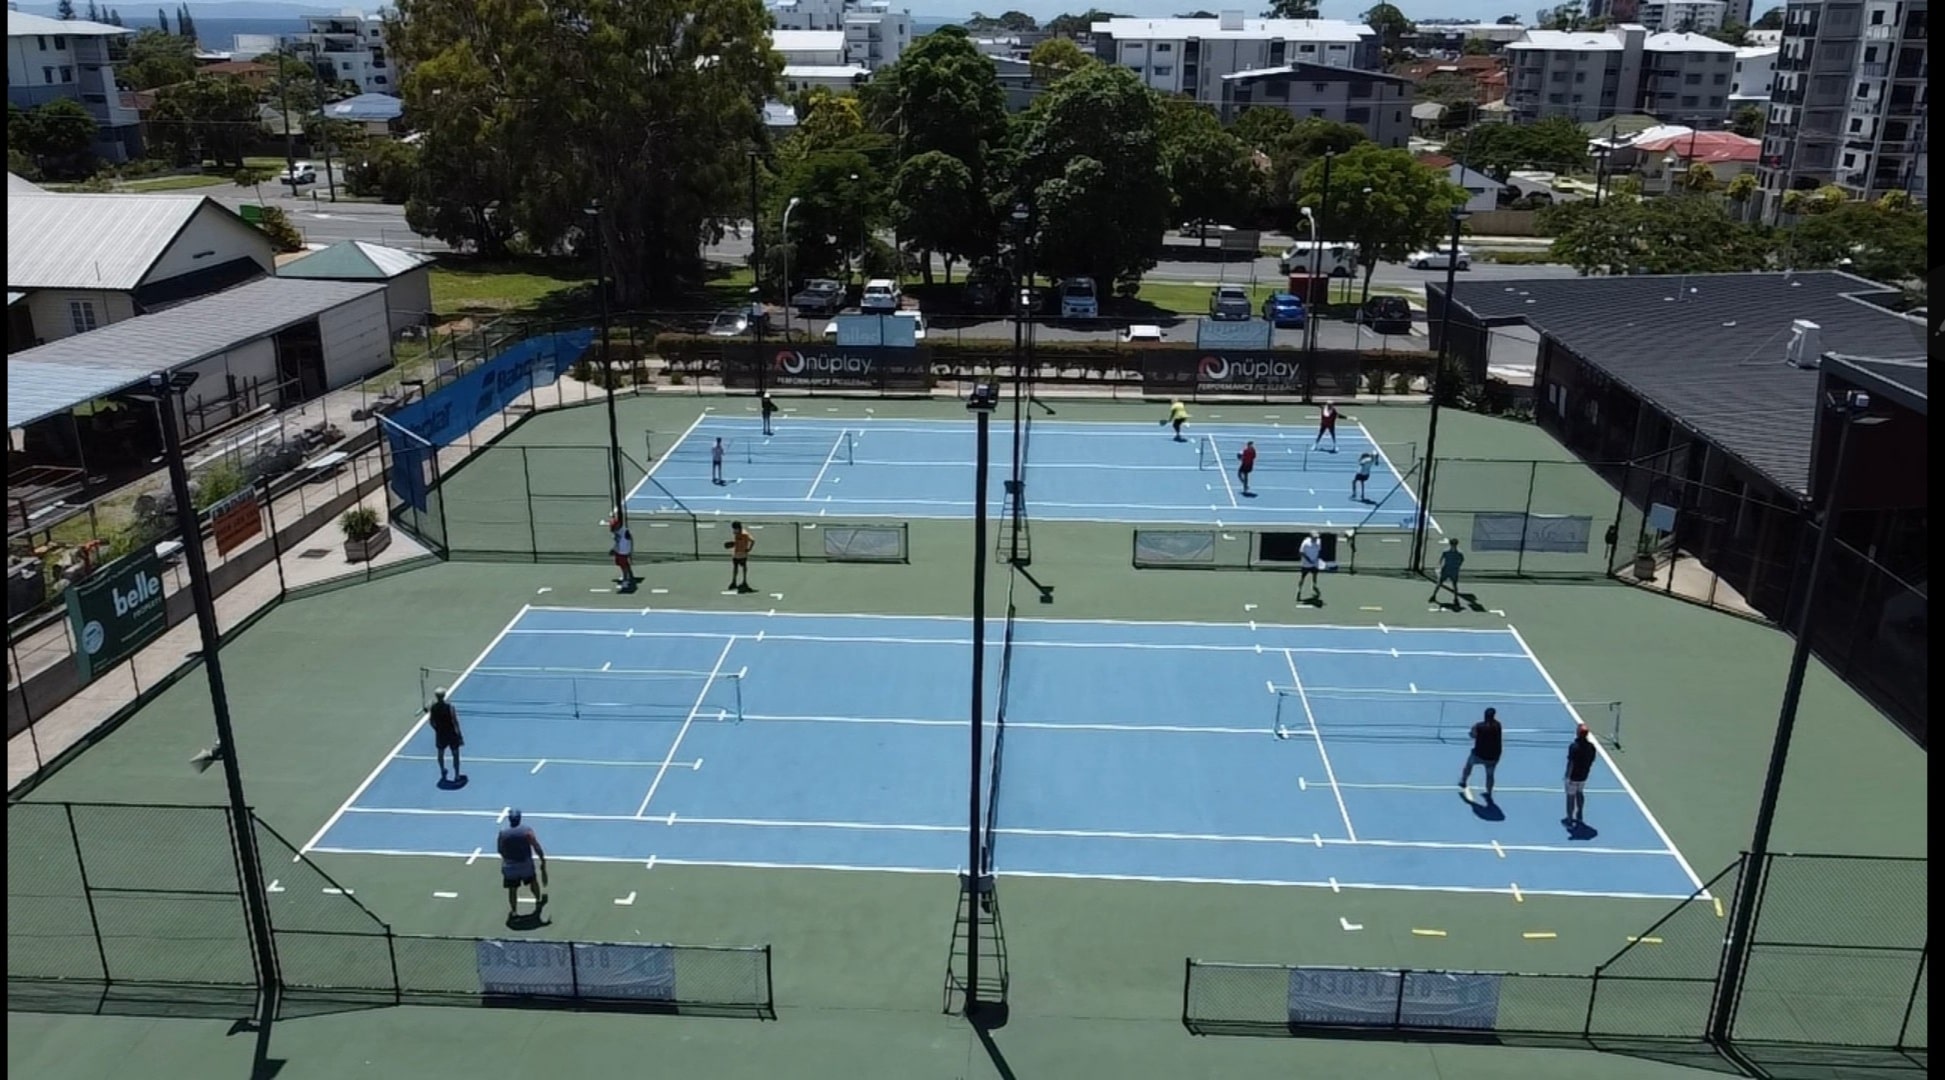 Close dronew shot of Focus Tennis Academy tennis court with players